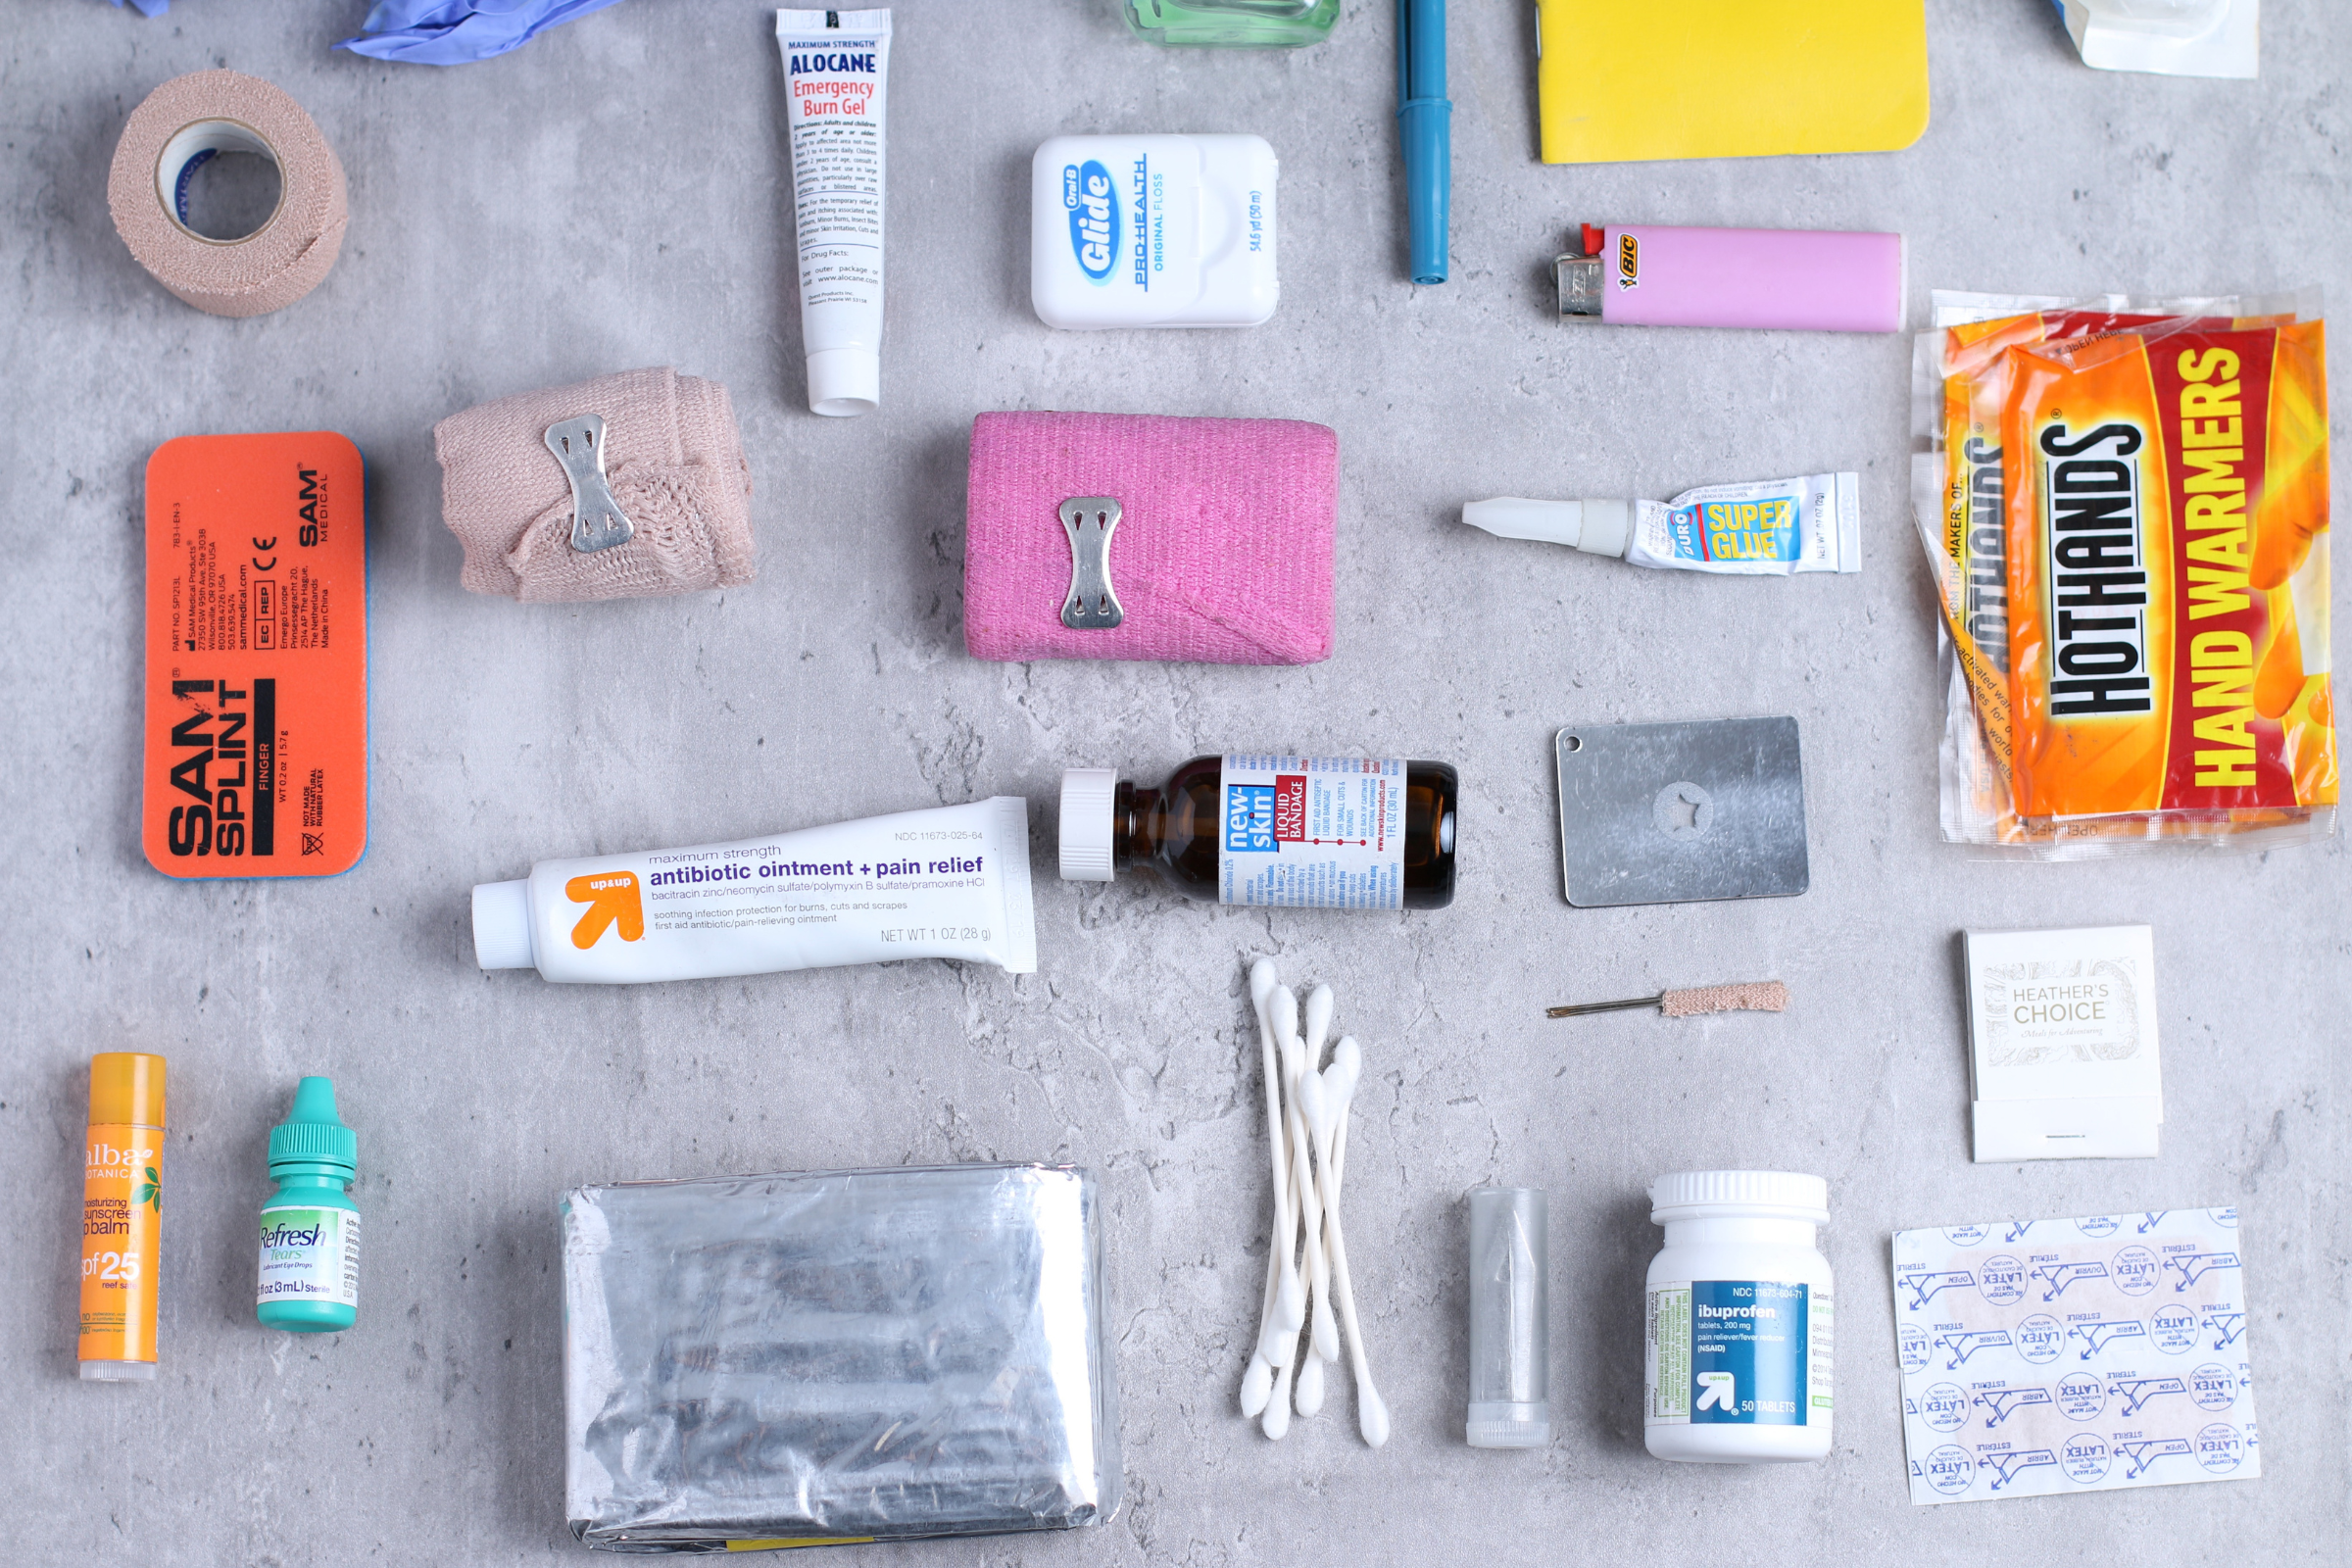 Building a Backcountry First Aid Kit